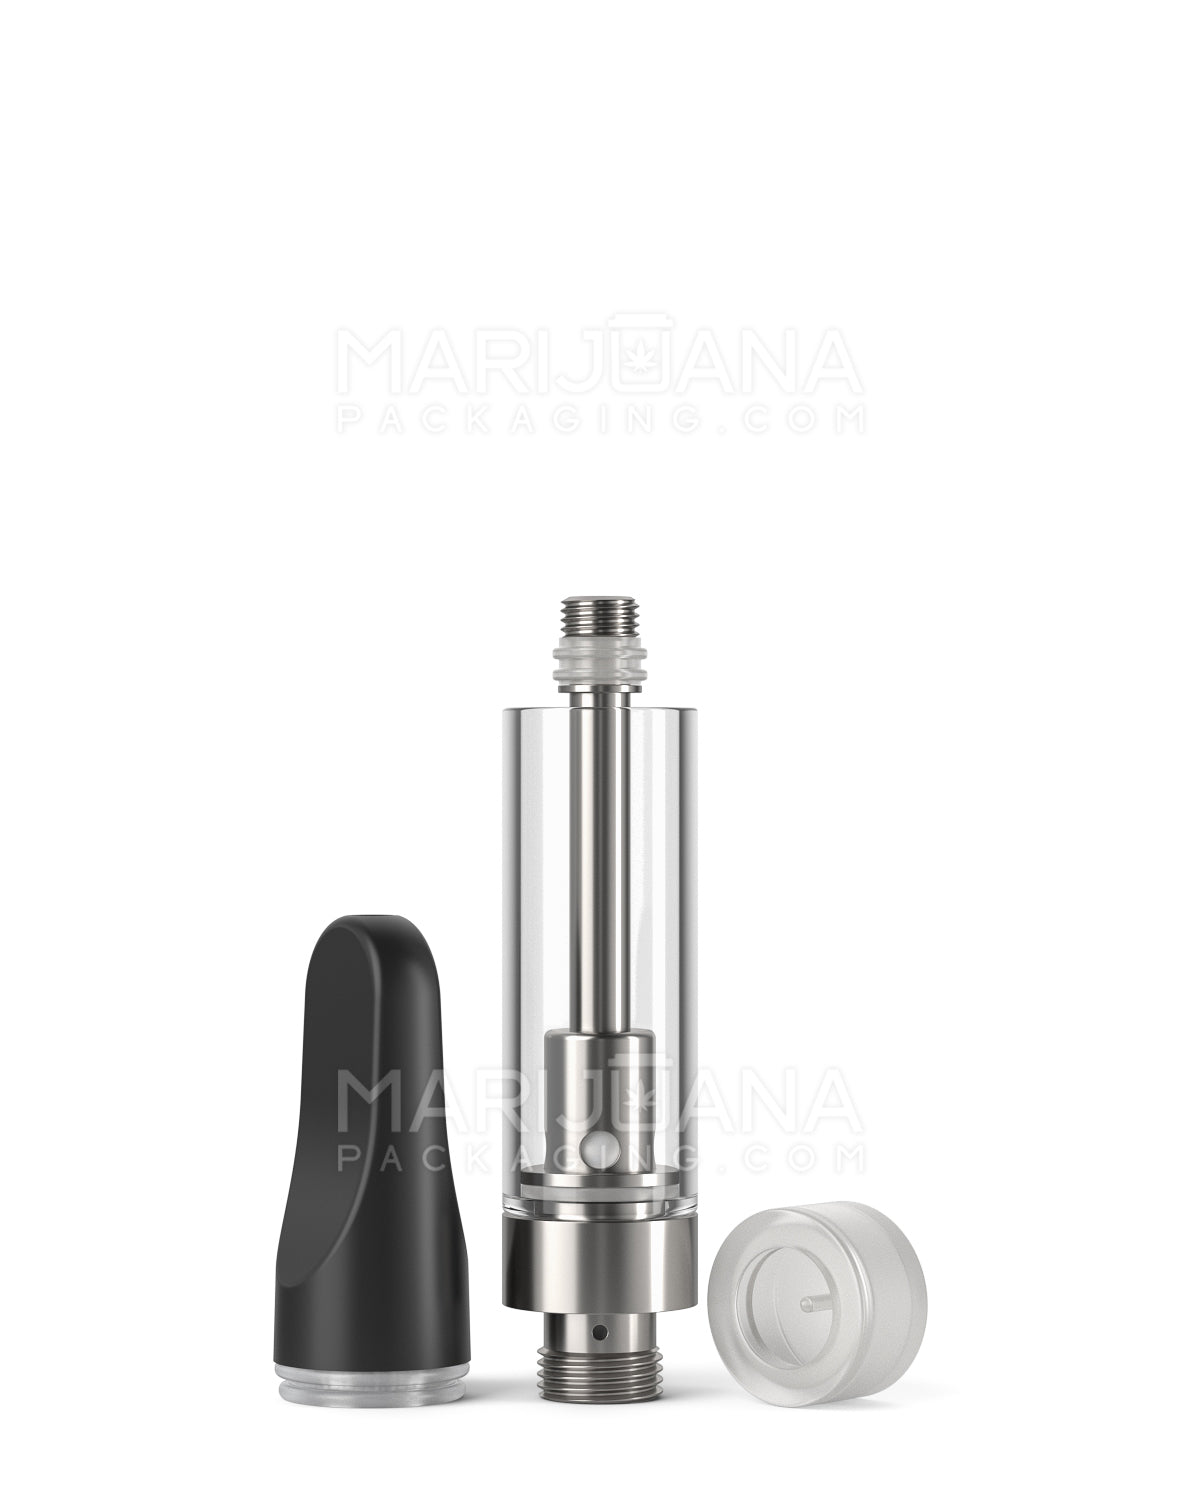 CCELL | Liquid6 Reactor Glass Vape Cartridge with Black Plastic Mouthpiece | 1mL - Screw On - 100 Count - 5